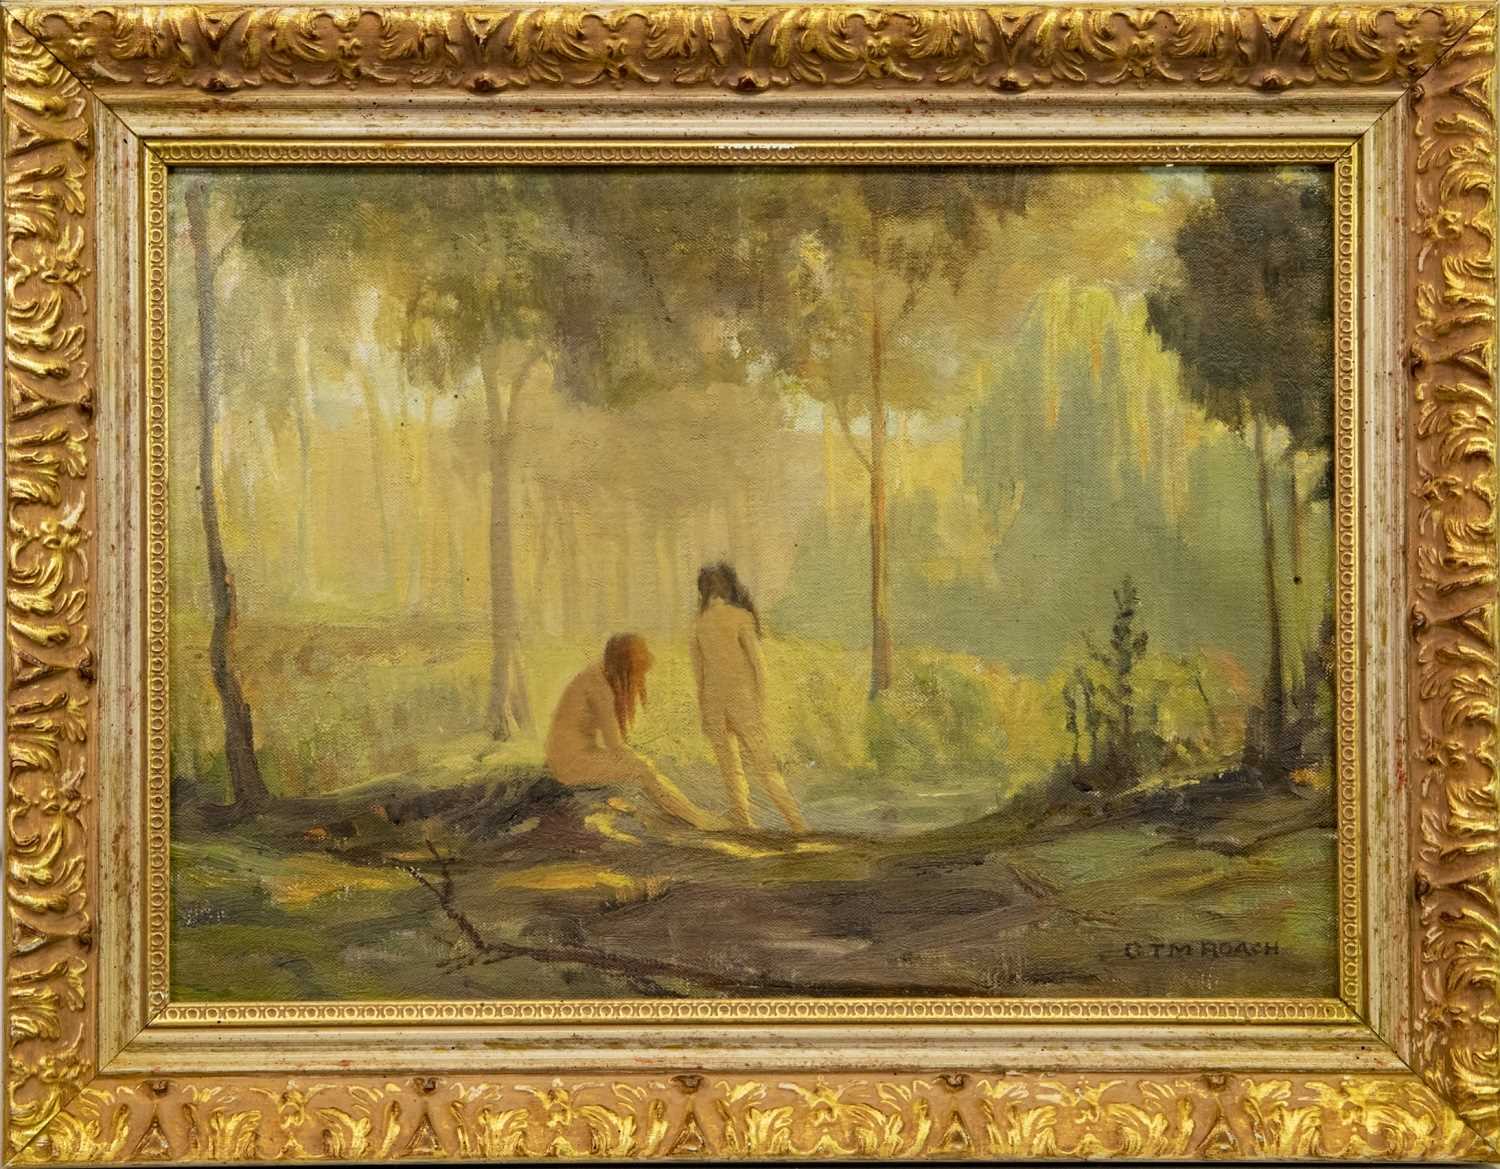 Lot 12 - IN THE PARADISE GROVE, AN OIL BY G.T.M ROACH